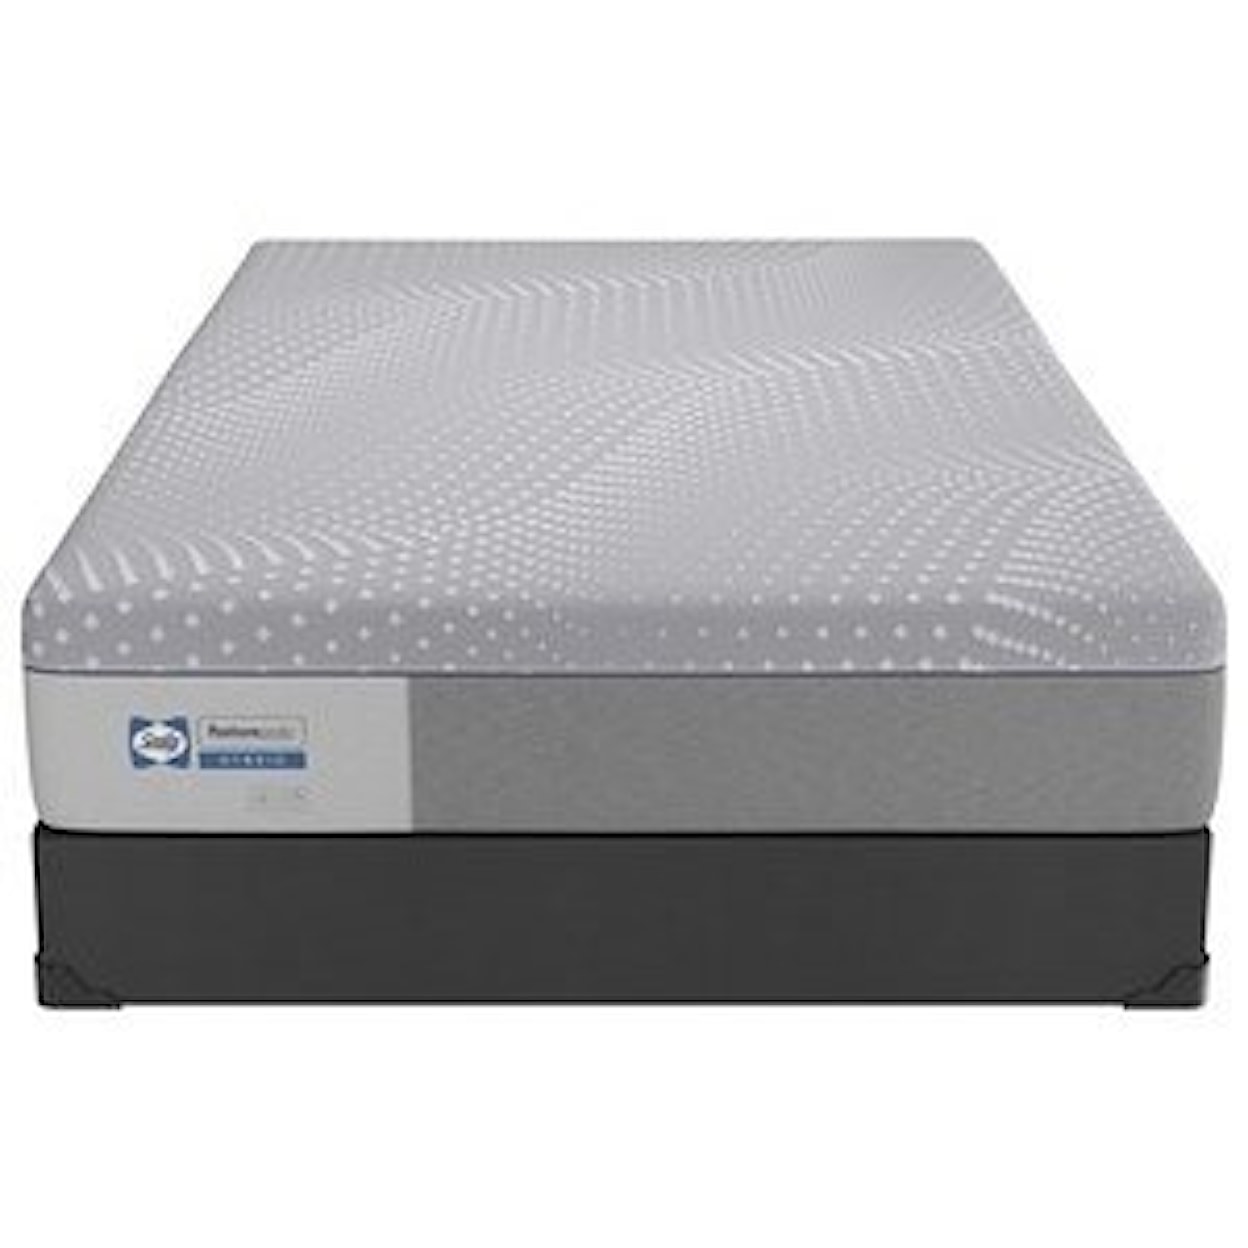 Sealy PPH5 Posturpedic Hybrid Firm Twin 13" Firm Hybrid Low Profile Set